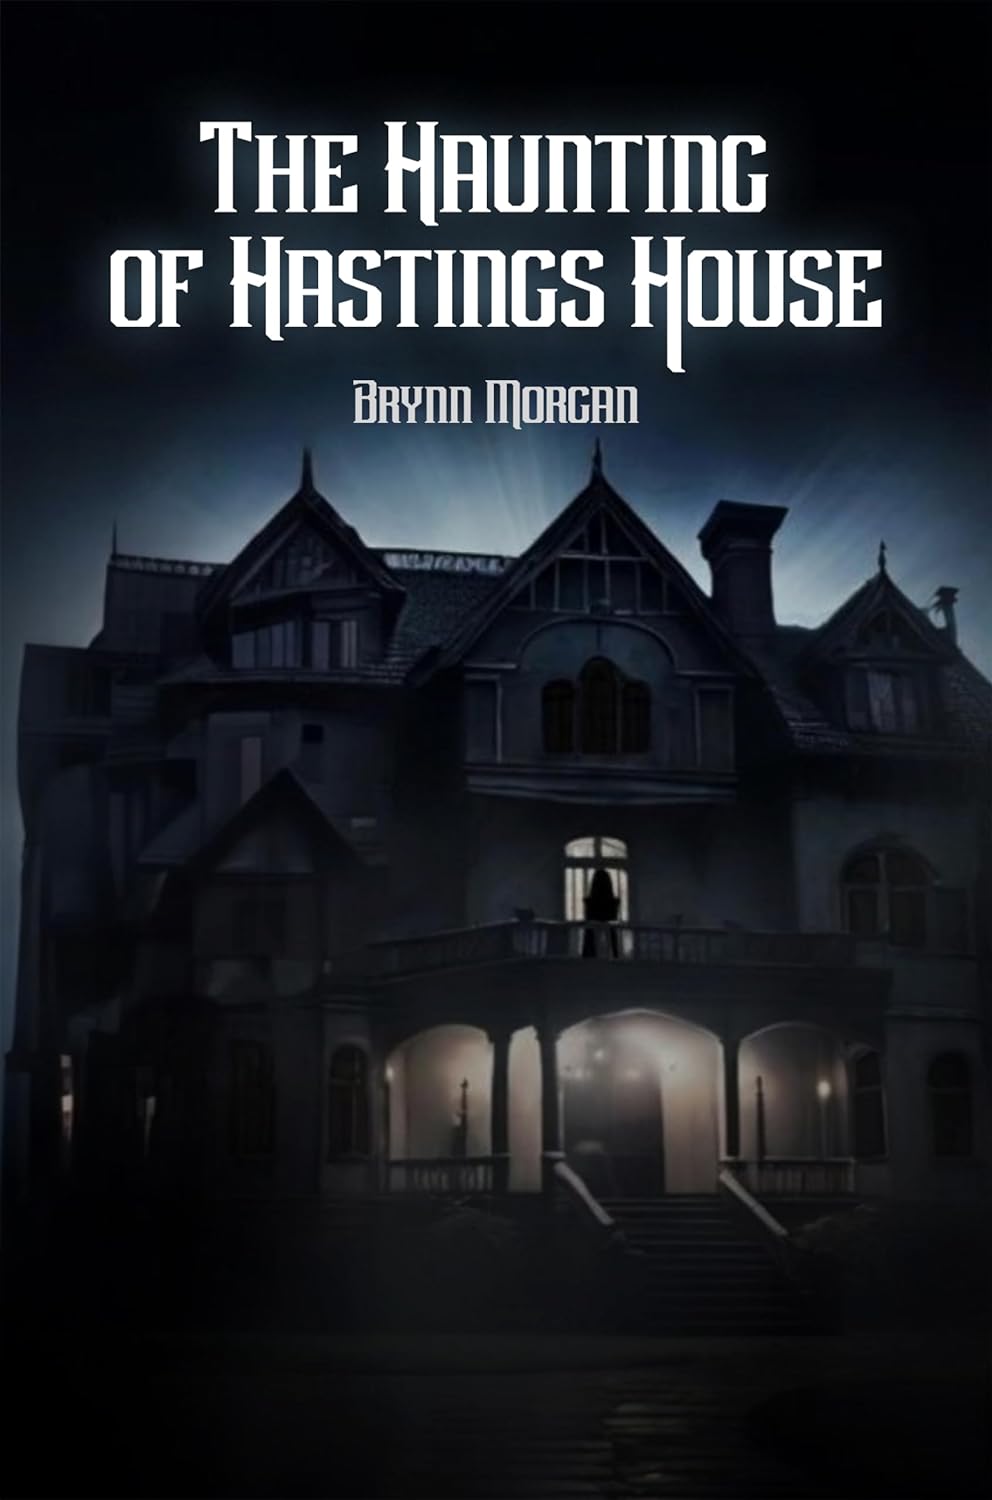 Captivating Tale of Love, Loss, and Haunting Secrets Unveiled in 'The Haunting of Hastings House'